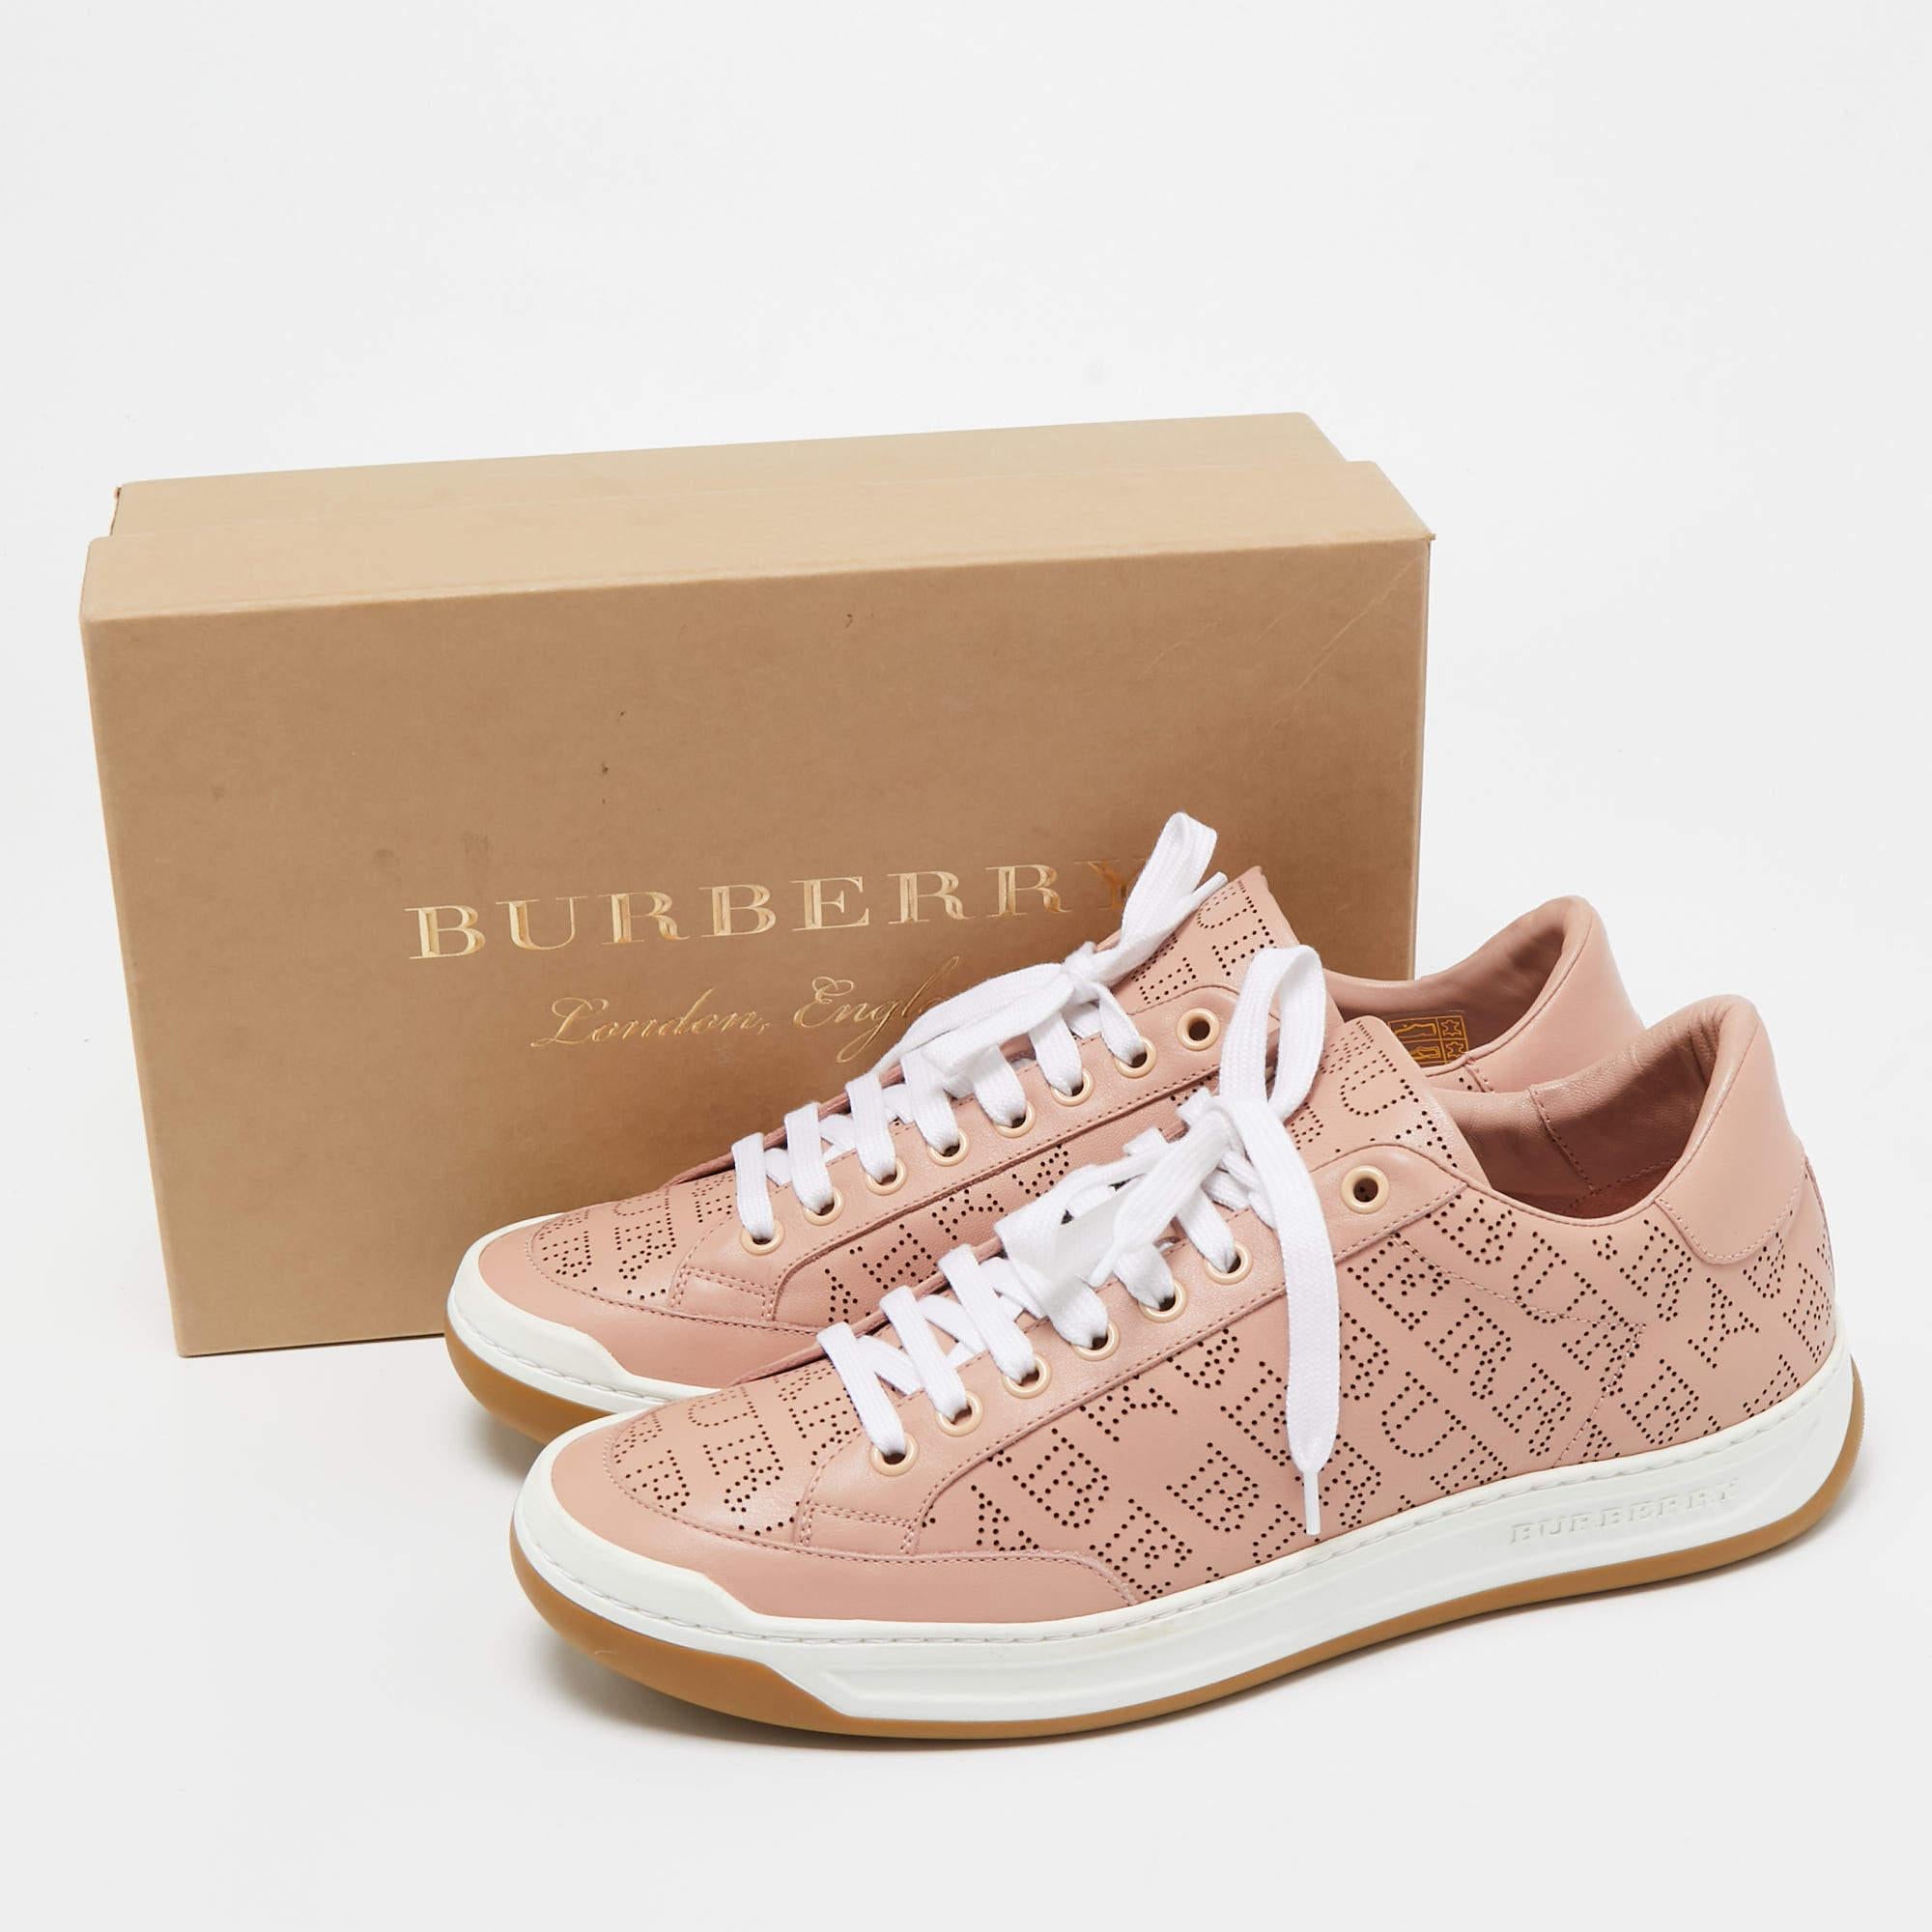 Burberry Pink Leather Westford Low Top Sneakers Size 41 2